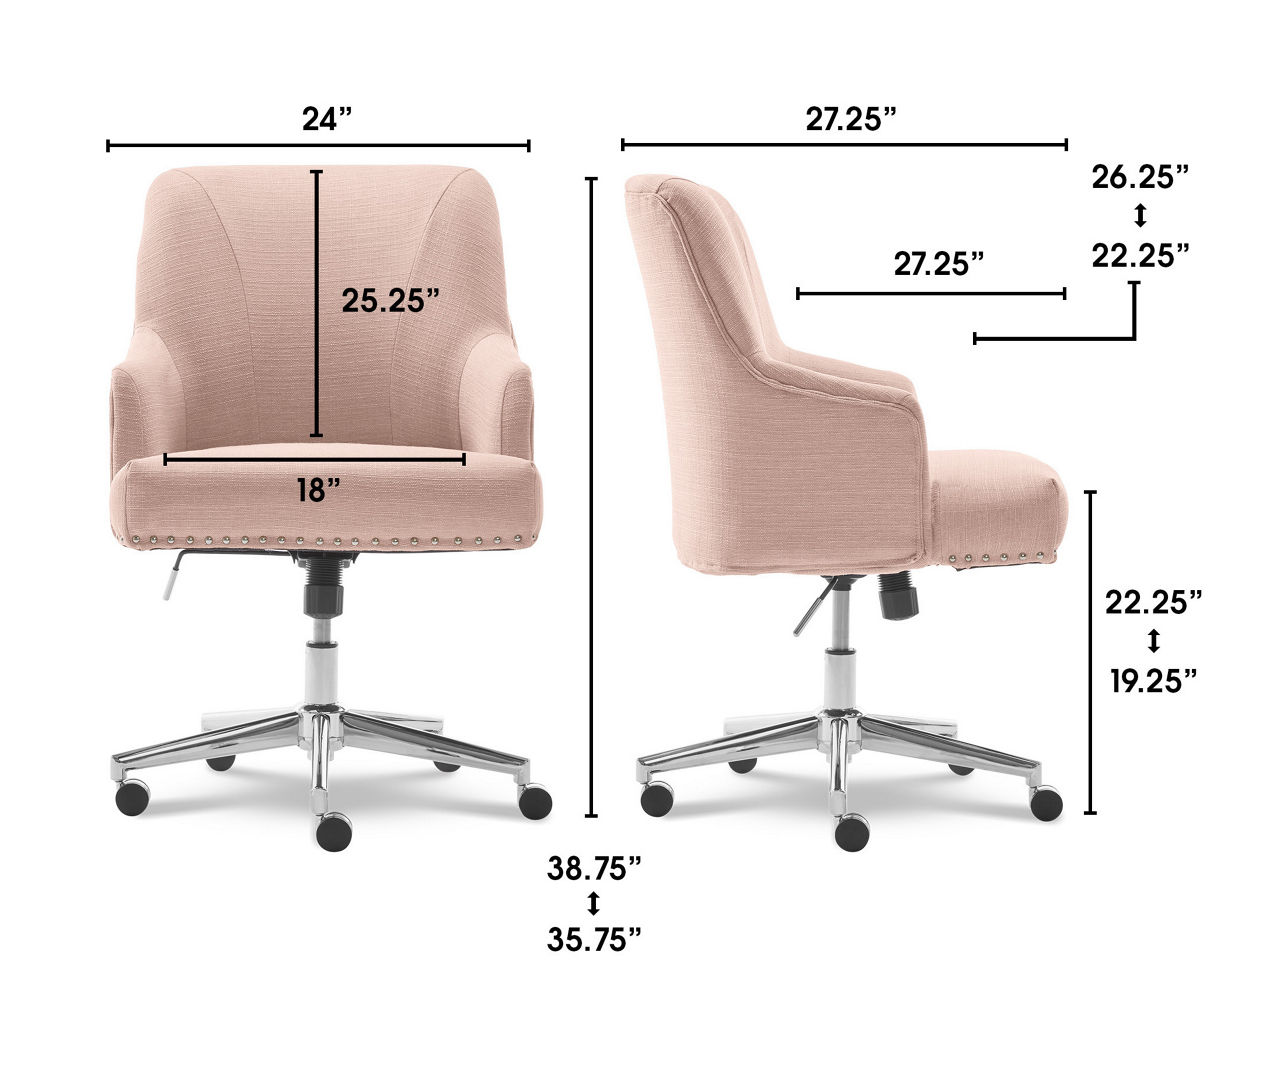 Serta Leighton Home Office Chair with Memory Foam Pink